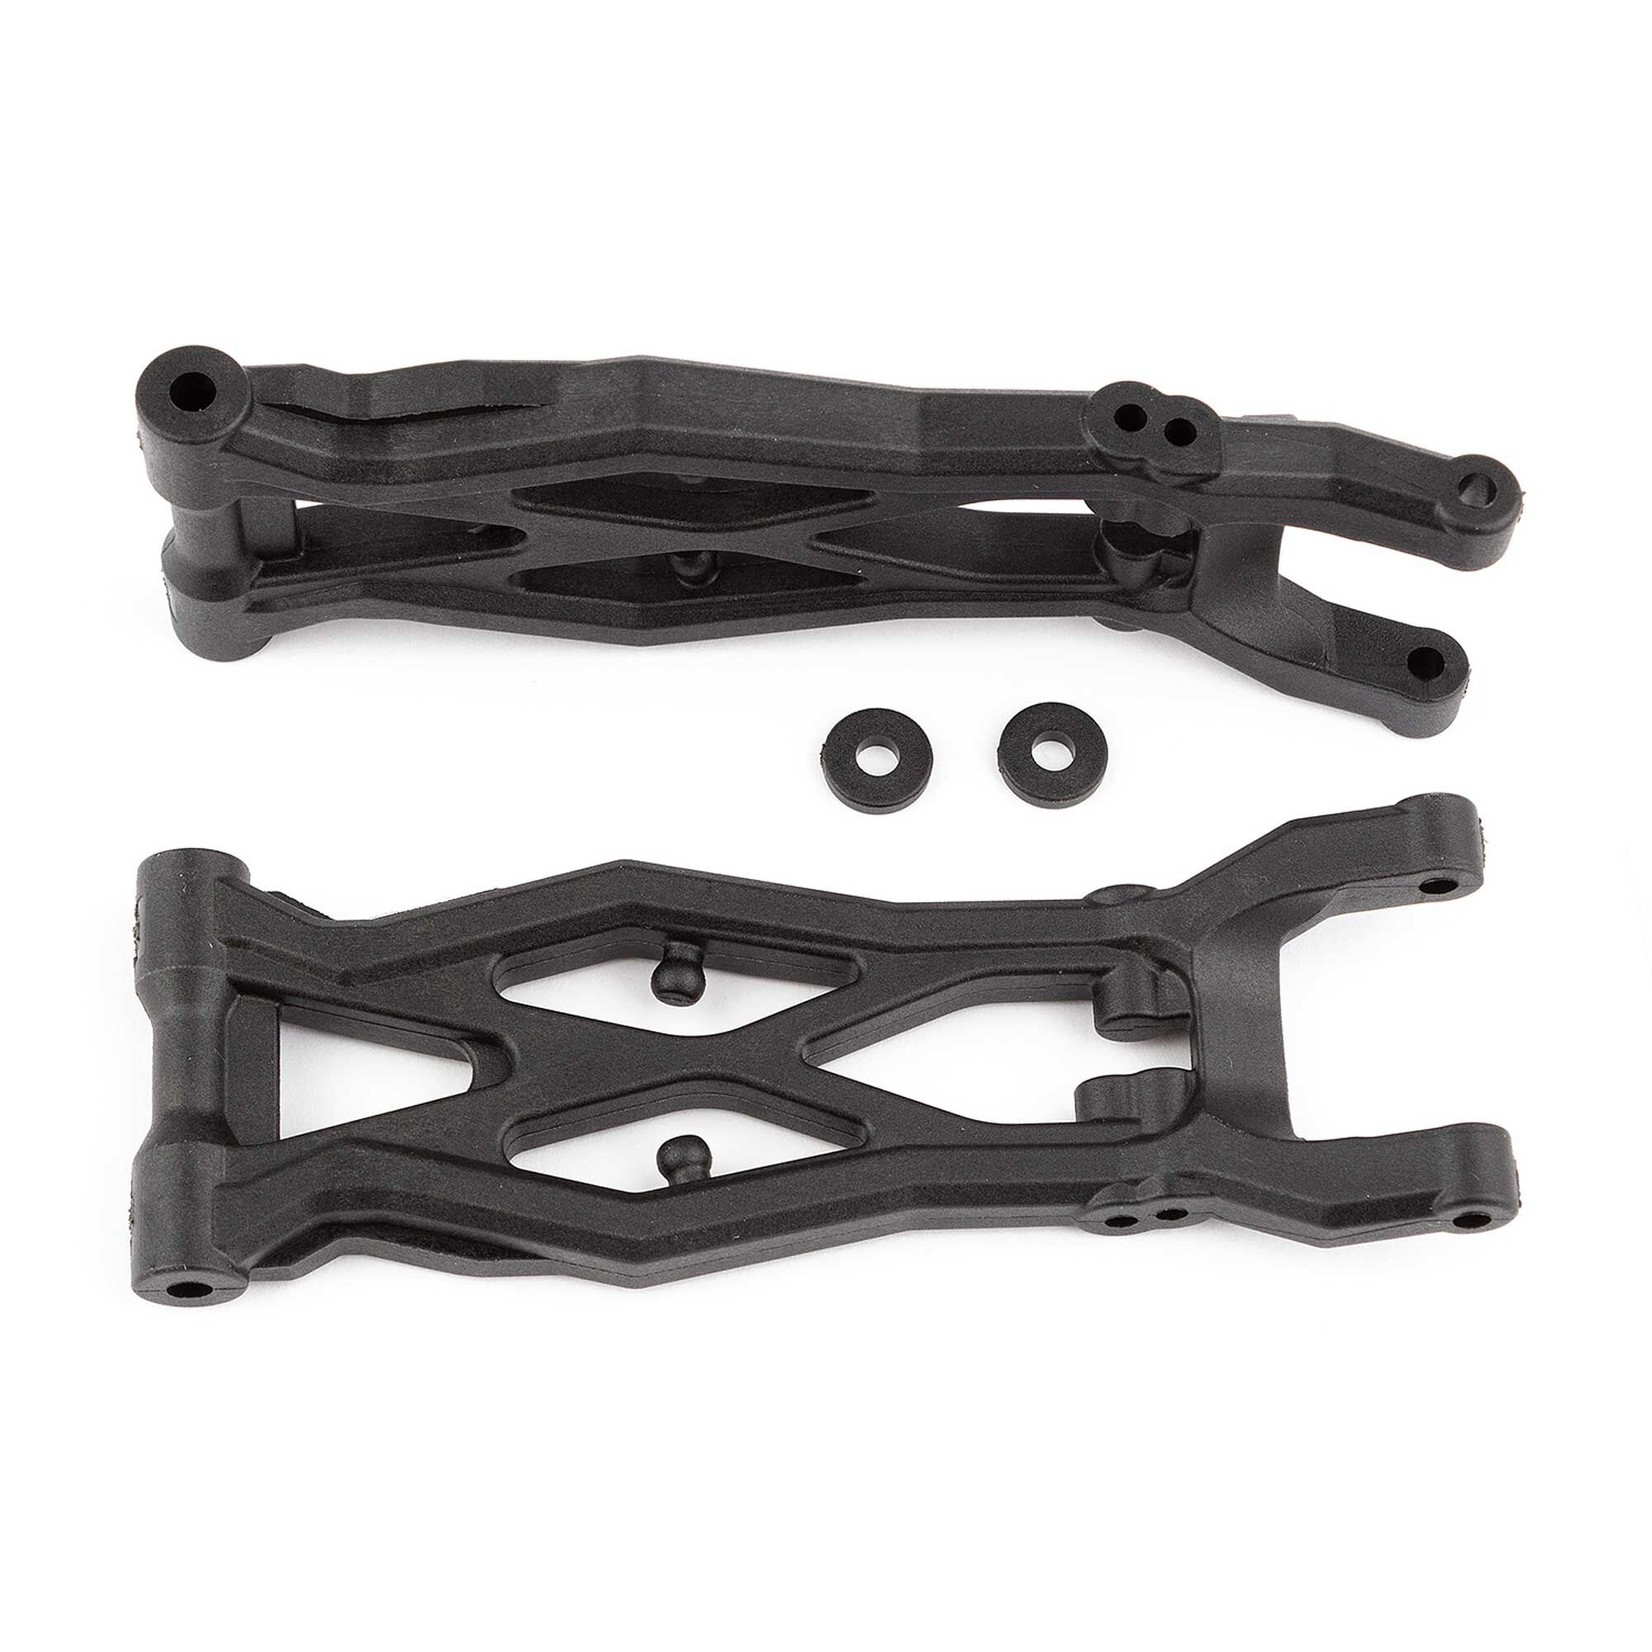 Team Associated RC10T6.2 Rear Suspension Arms, gull wing